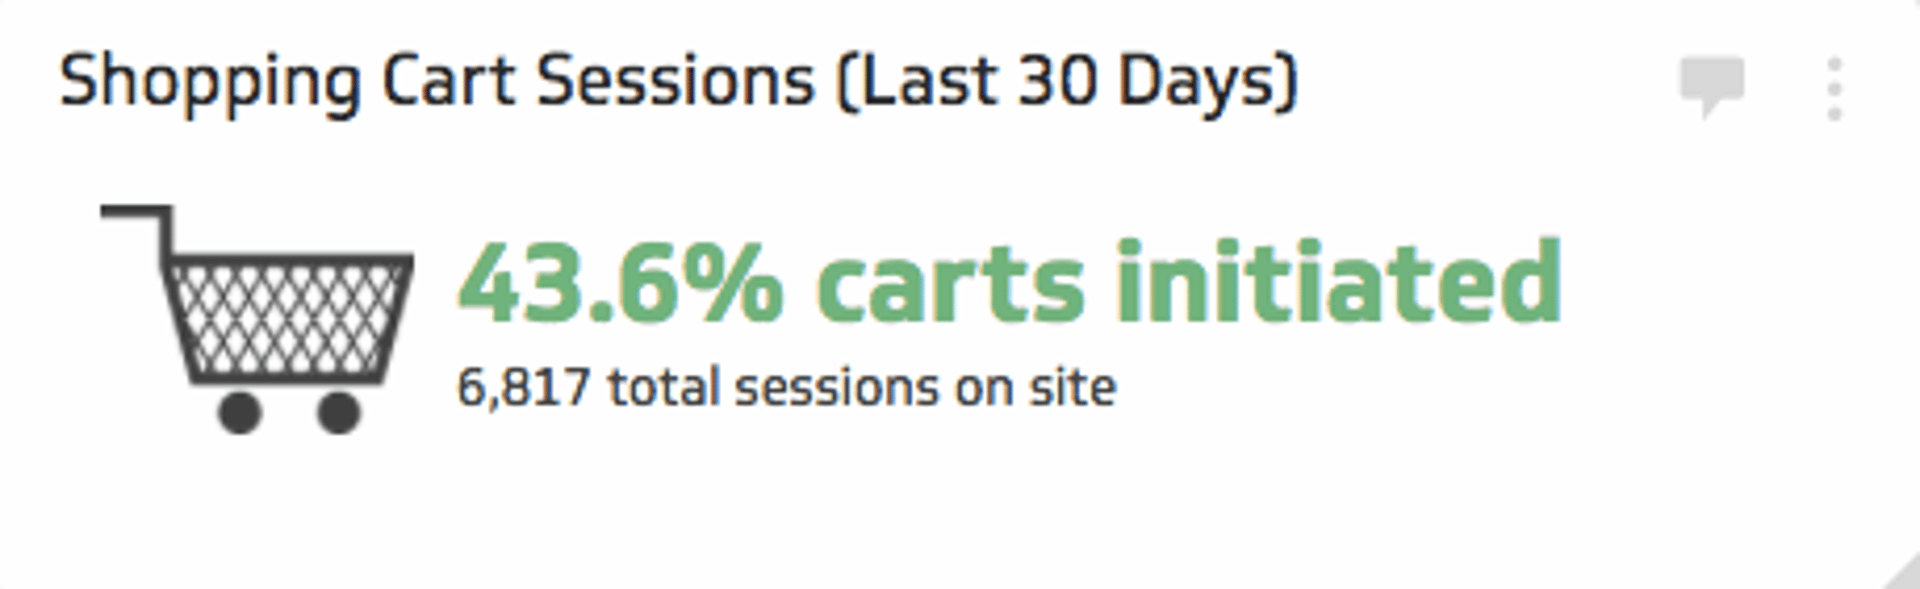 Related KPI Examples - Shopping Cart Sessions Metric